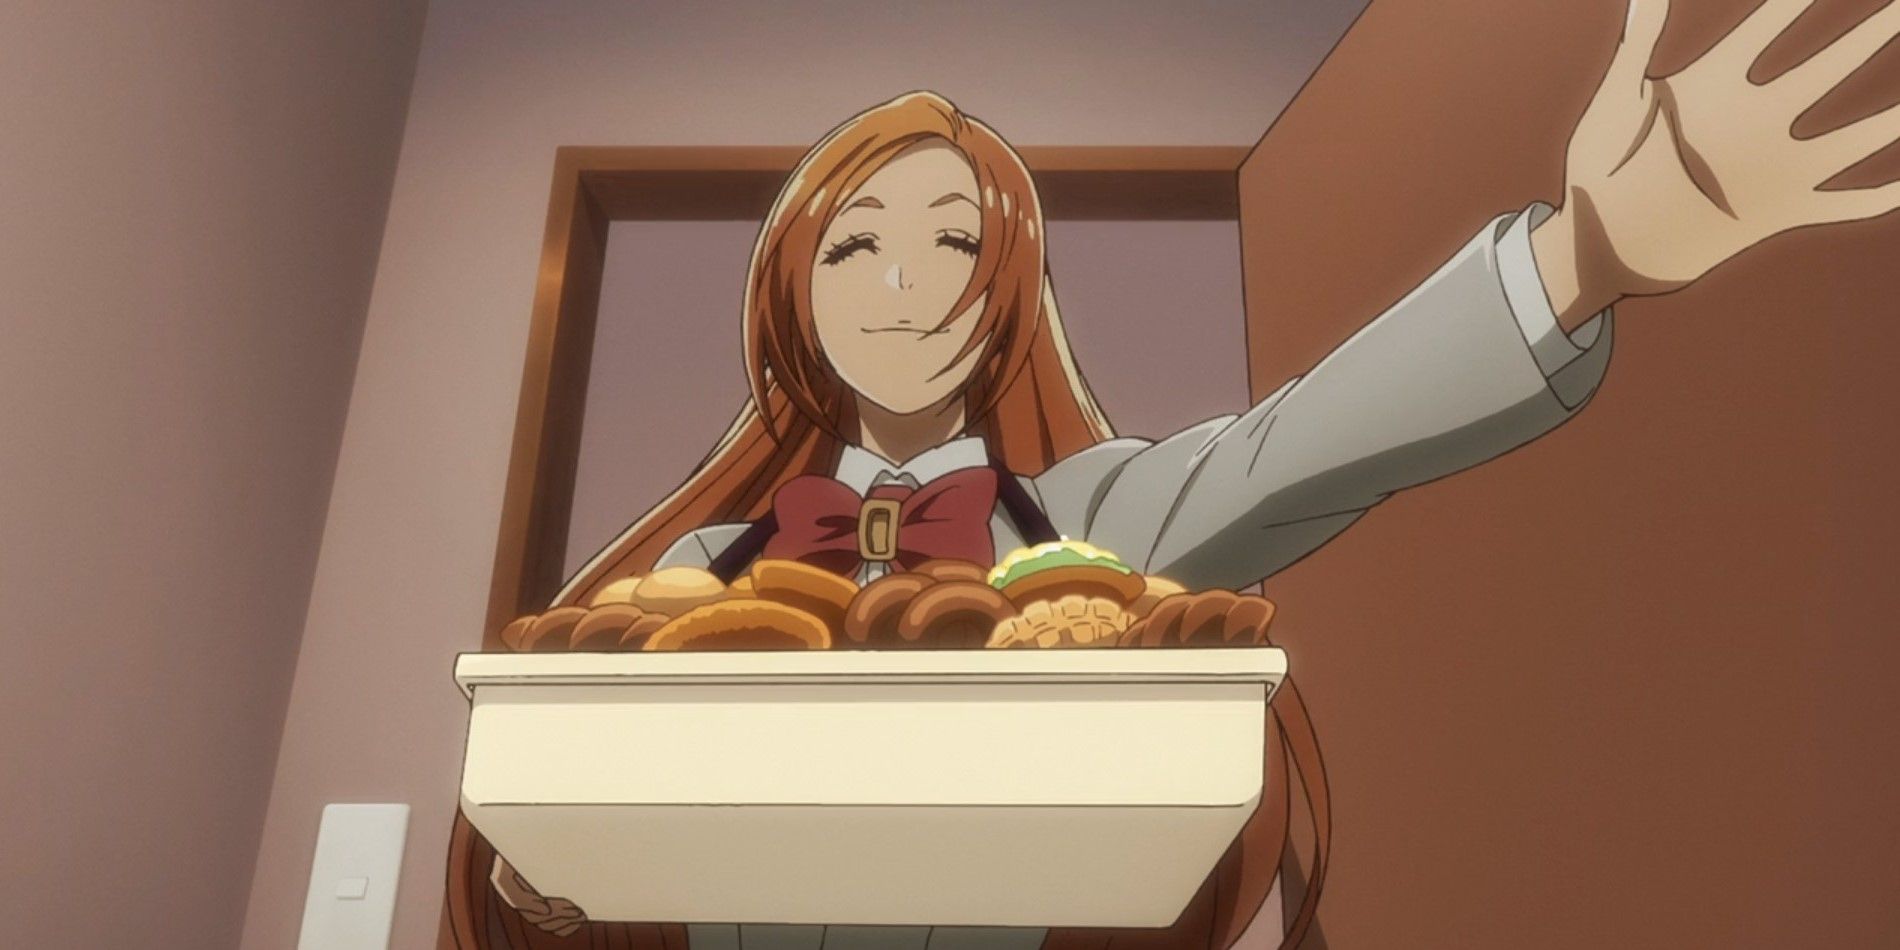 Bleach Orihime Inoue arrives with bread